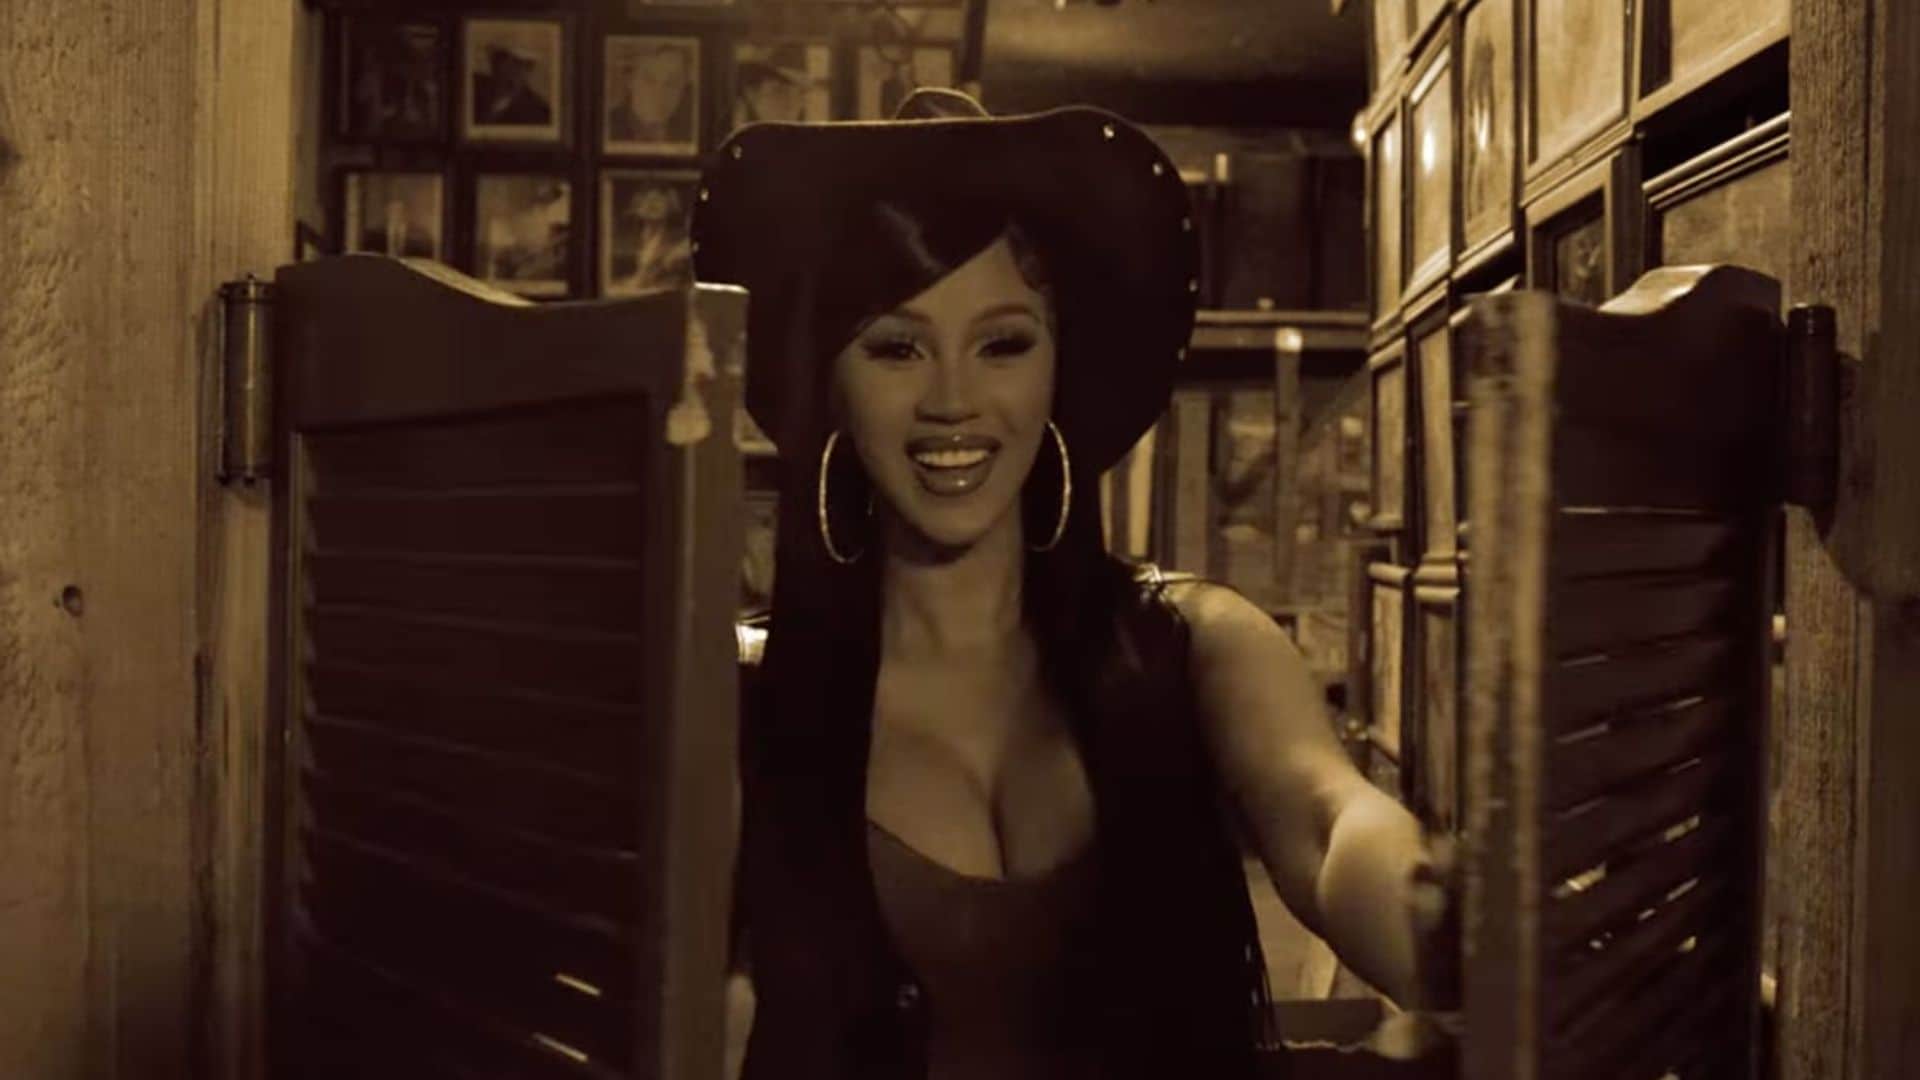 Cardi B riding a mechanical bull is the perfect pick-me-up video you need today